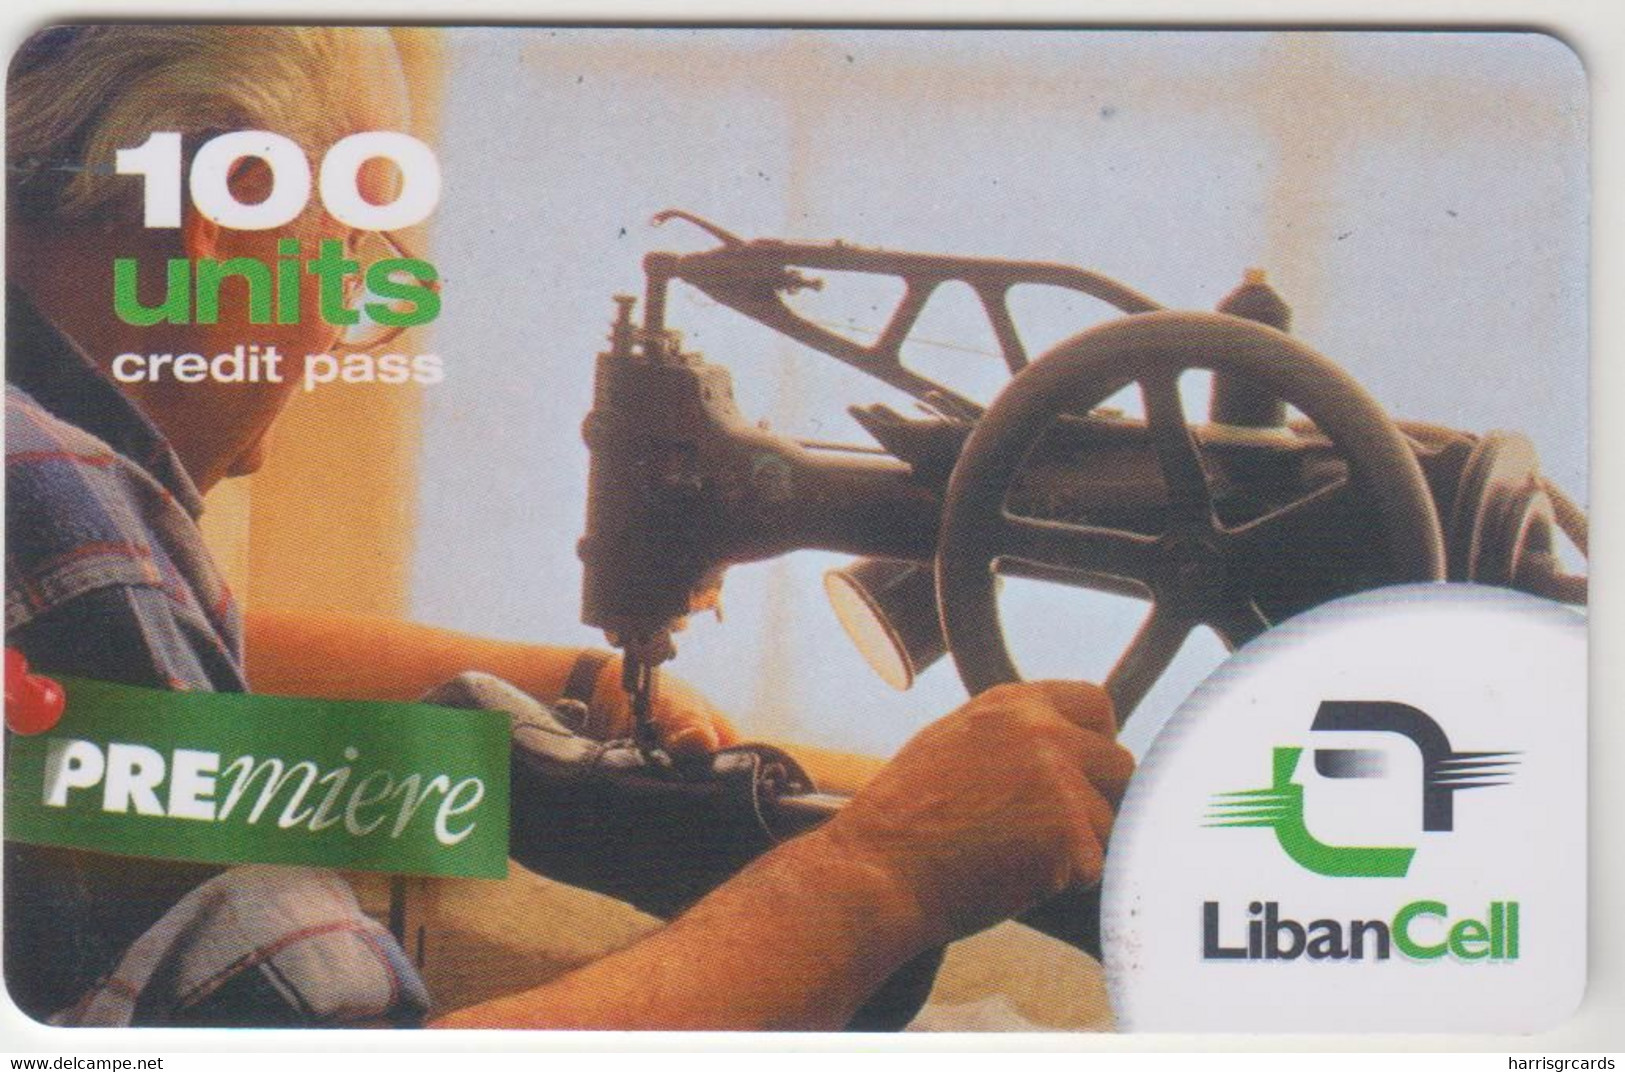 LEBANON - Premiere - Sewing Machine, Libancell Recharge Card 100 Units, Exp.date 27/01/06, Used - Liban